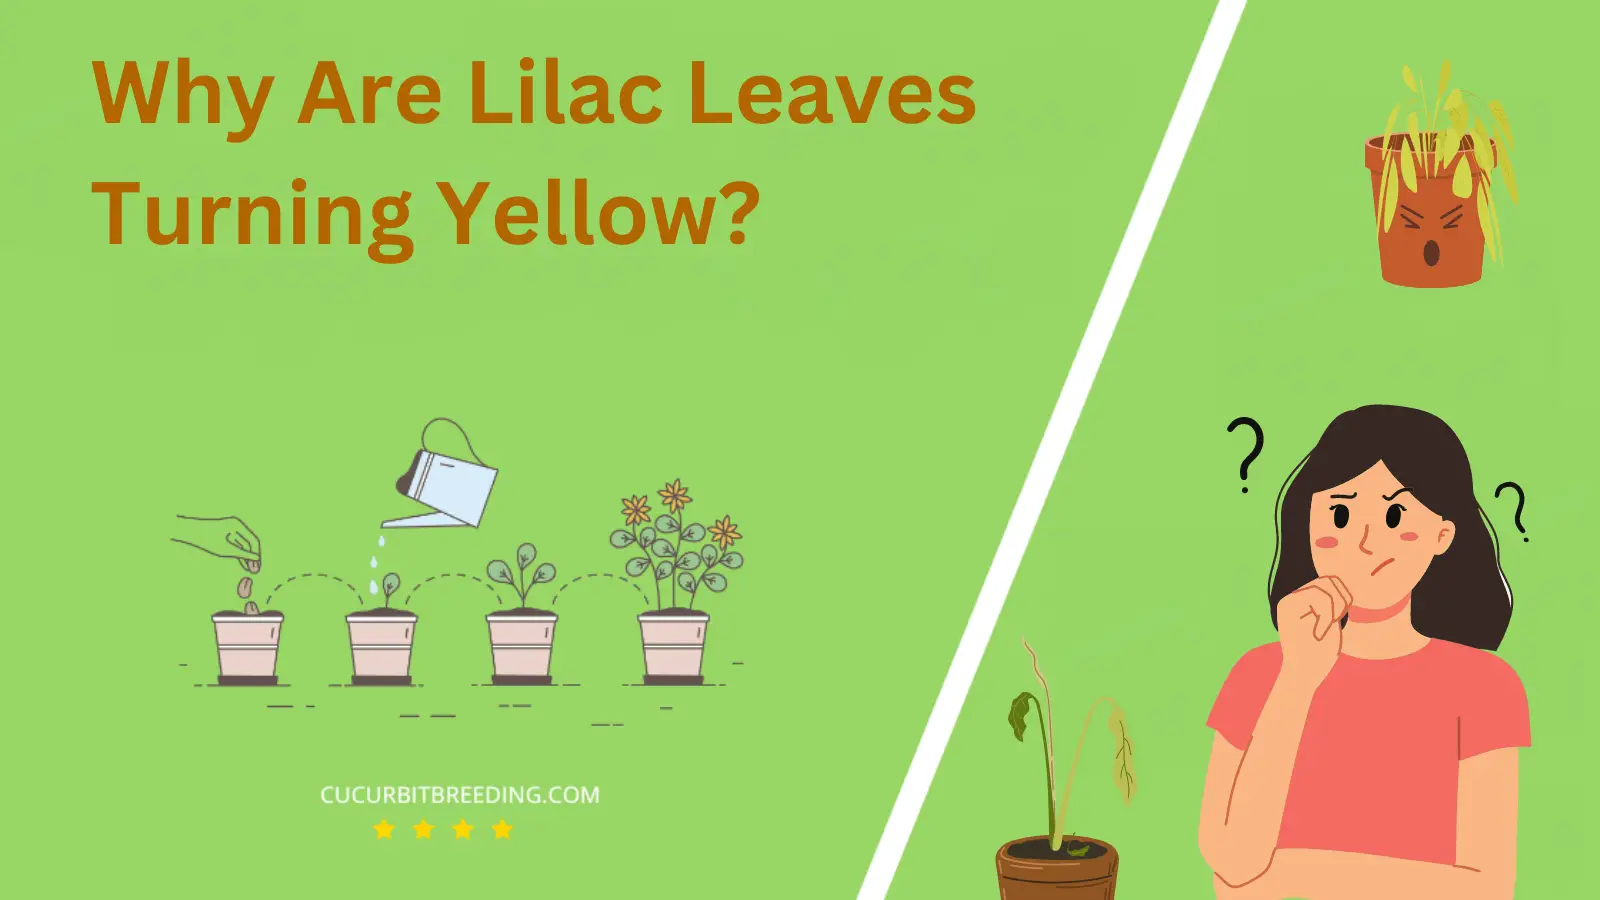 Why Are Lilac Leaves Turning Yellow